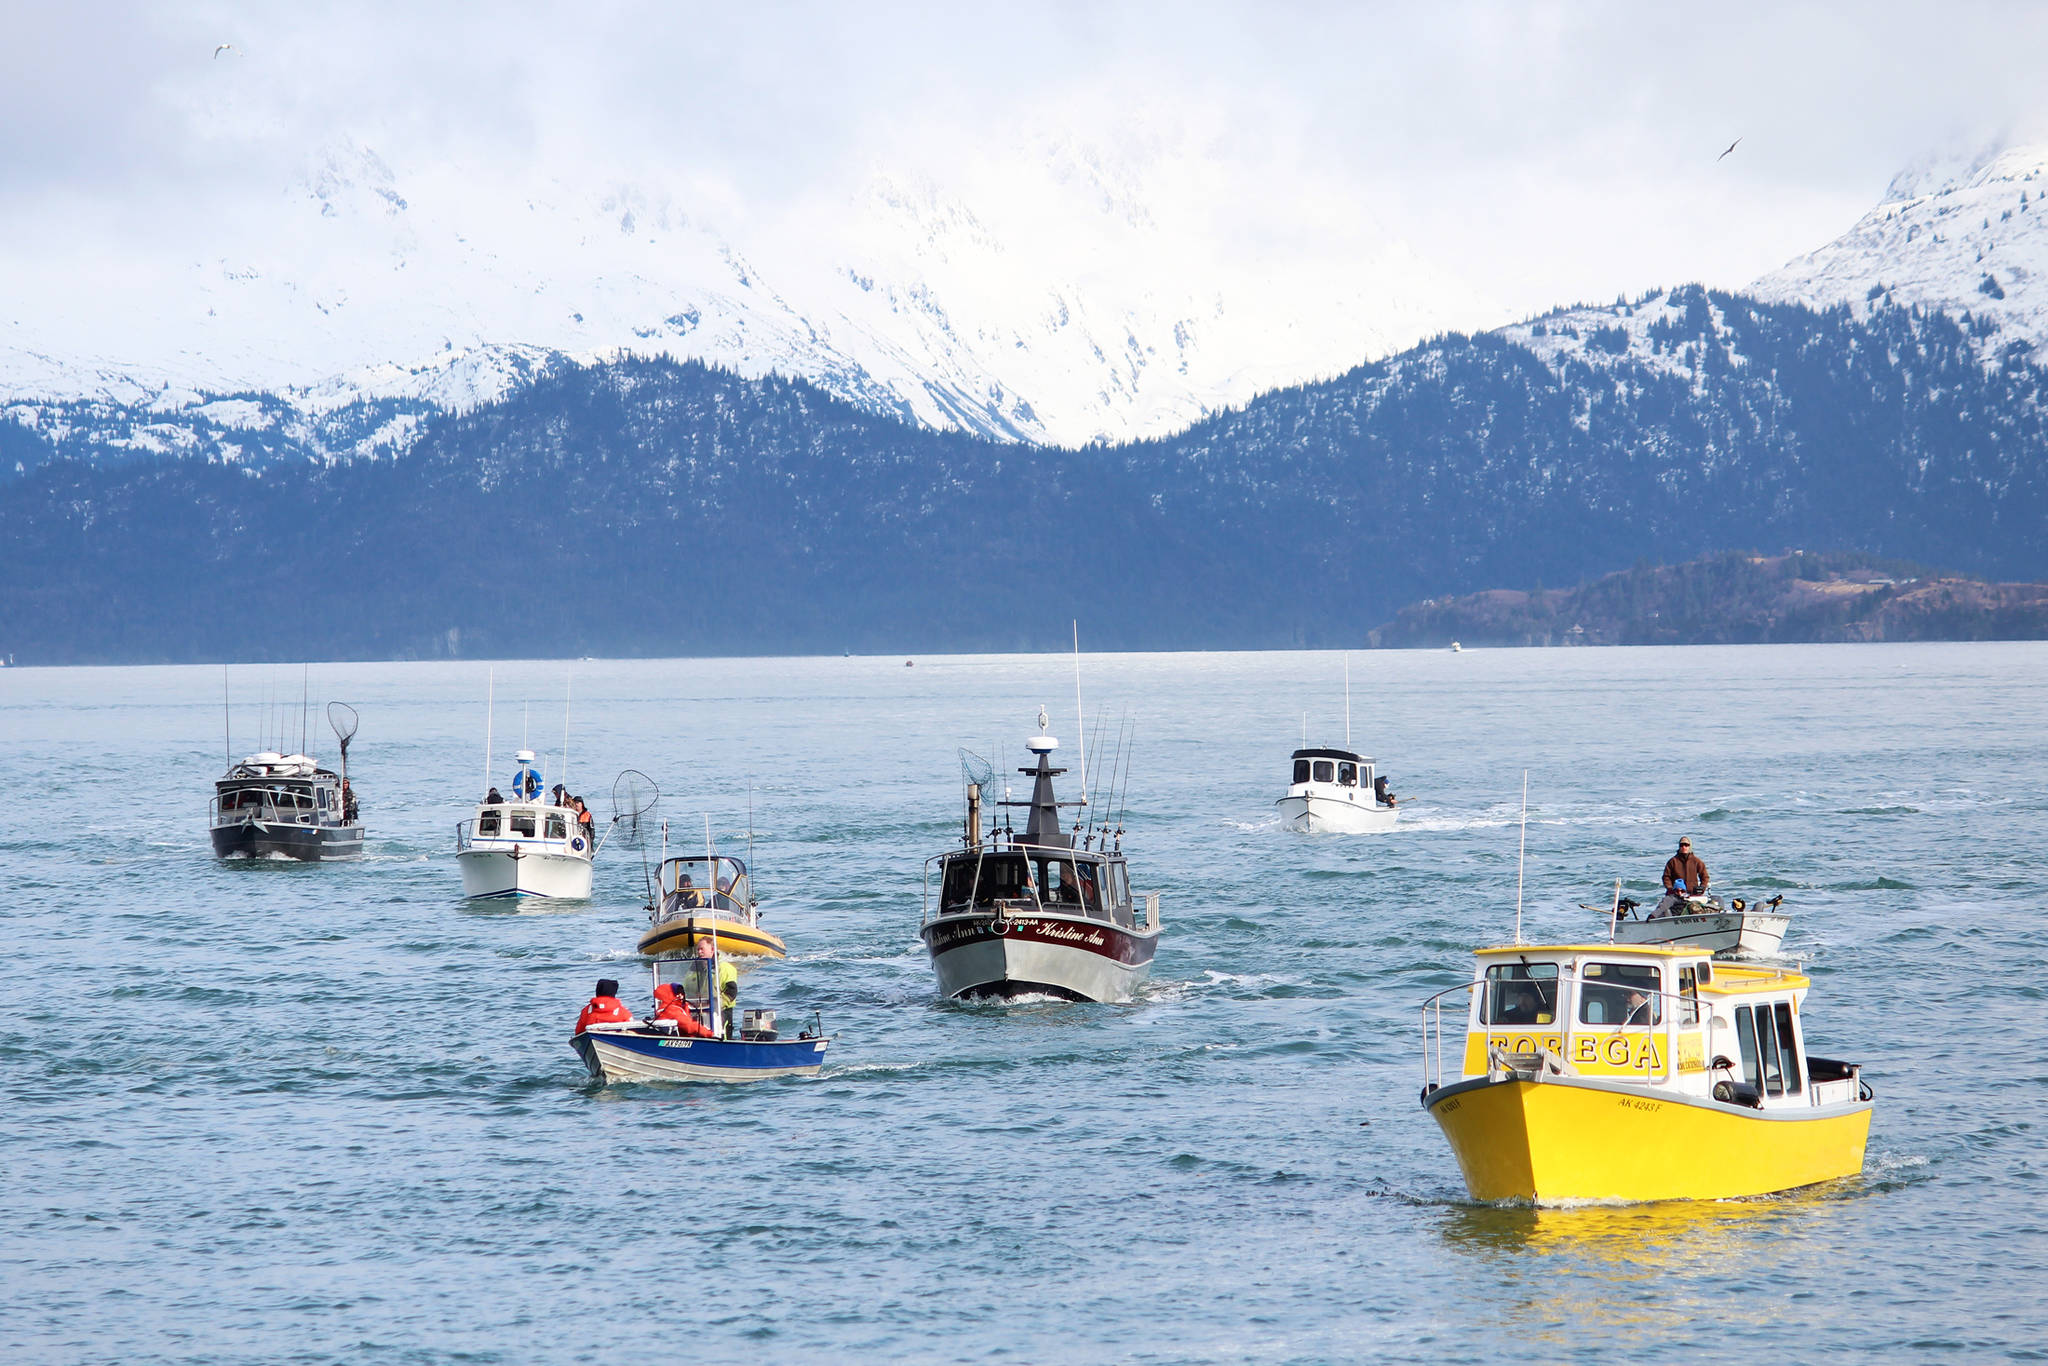 Anglers return in their boats to the Homer Harbor from Kachemak Bay at the end of the Homer Winter King Salmon Tournament held March 23, 2019 in Homer, Alaska. (Photo by Megan Pacer/Homer News)